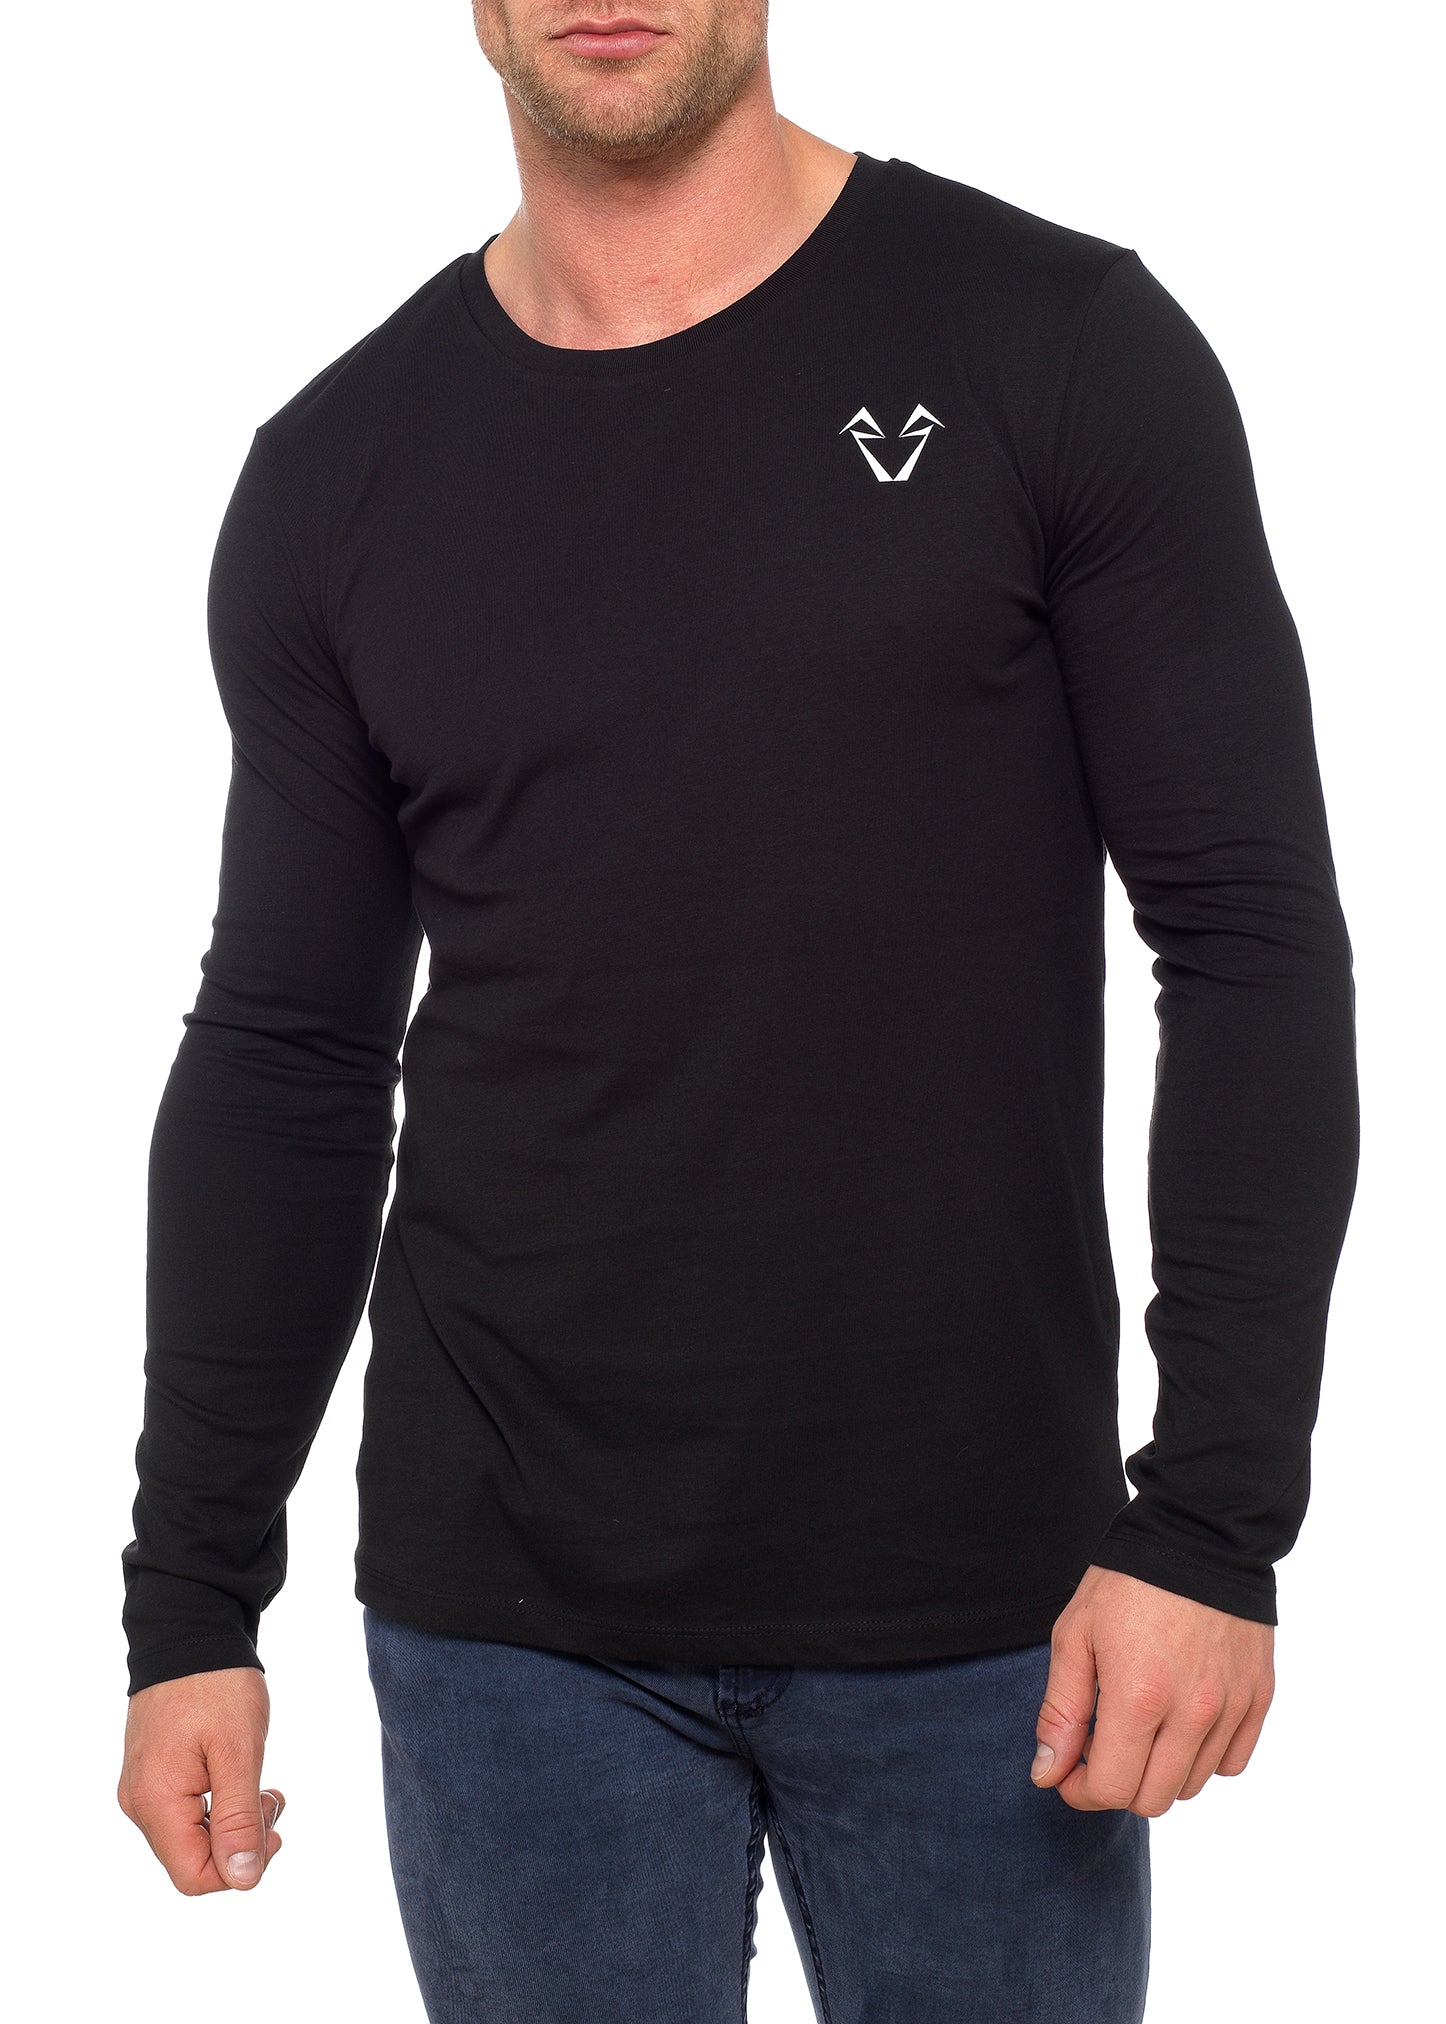 Mens Black Muscle Fit Long Sleeve T Shirts